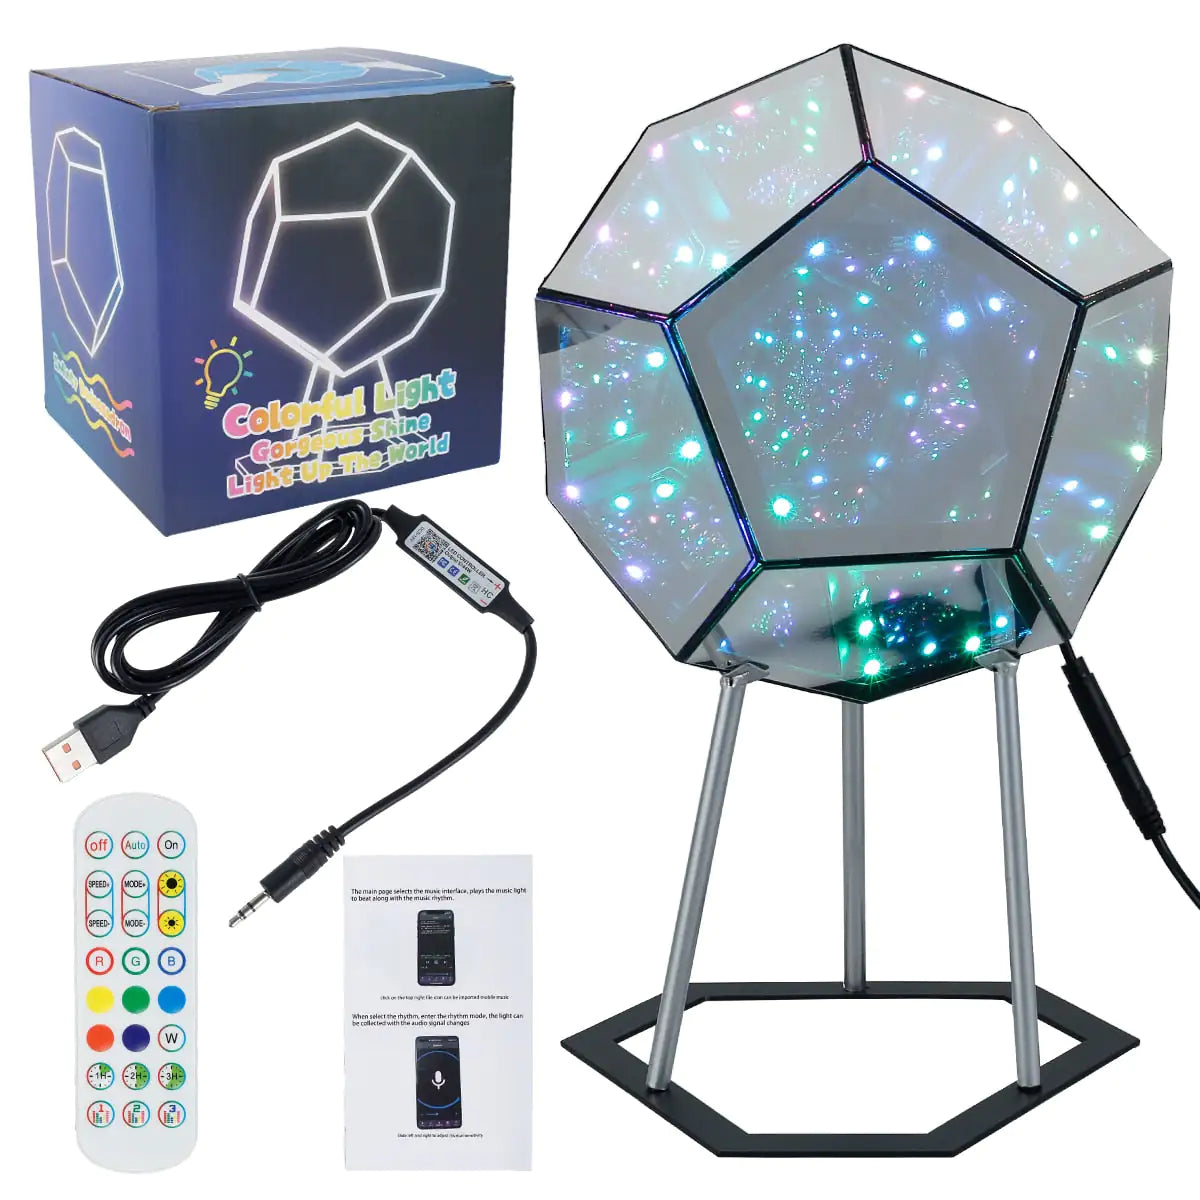 a disco ball with remote controls and a box